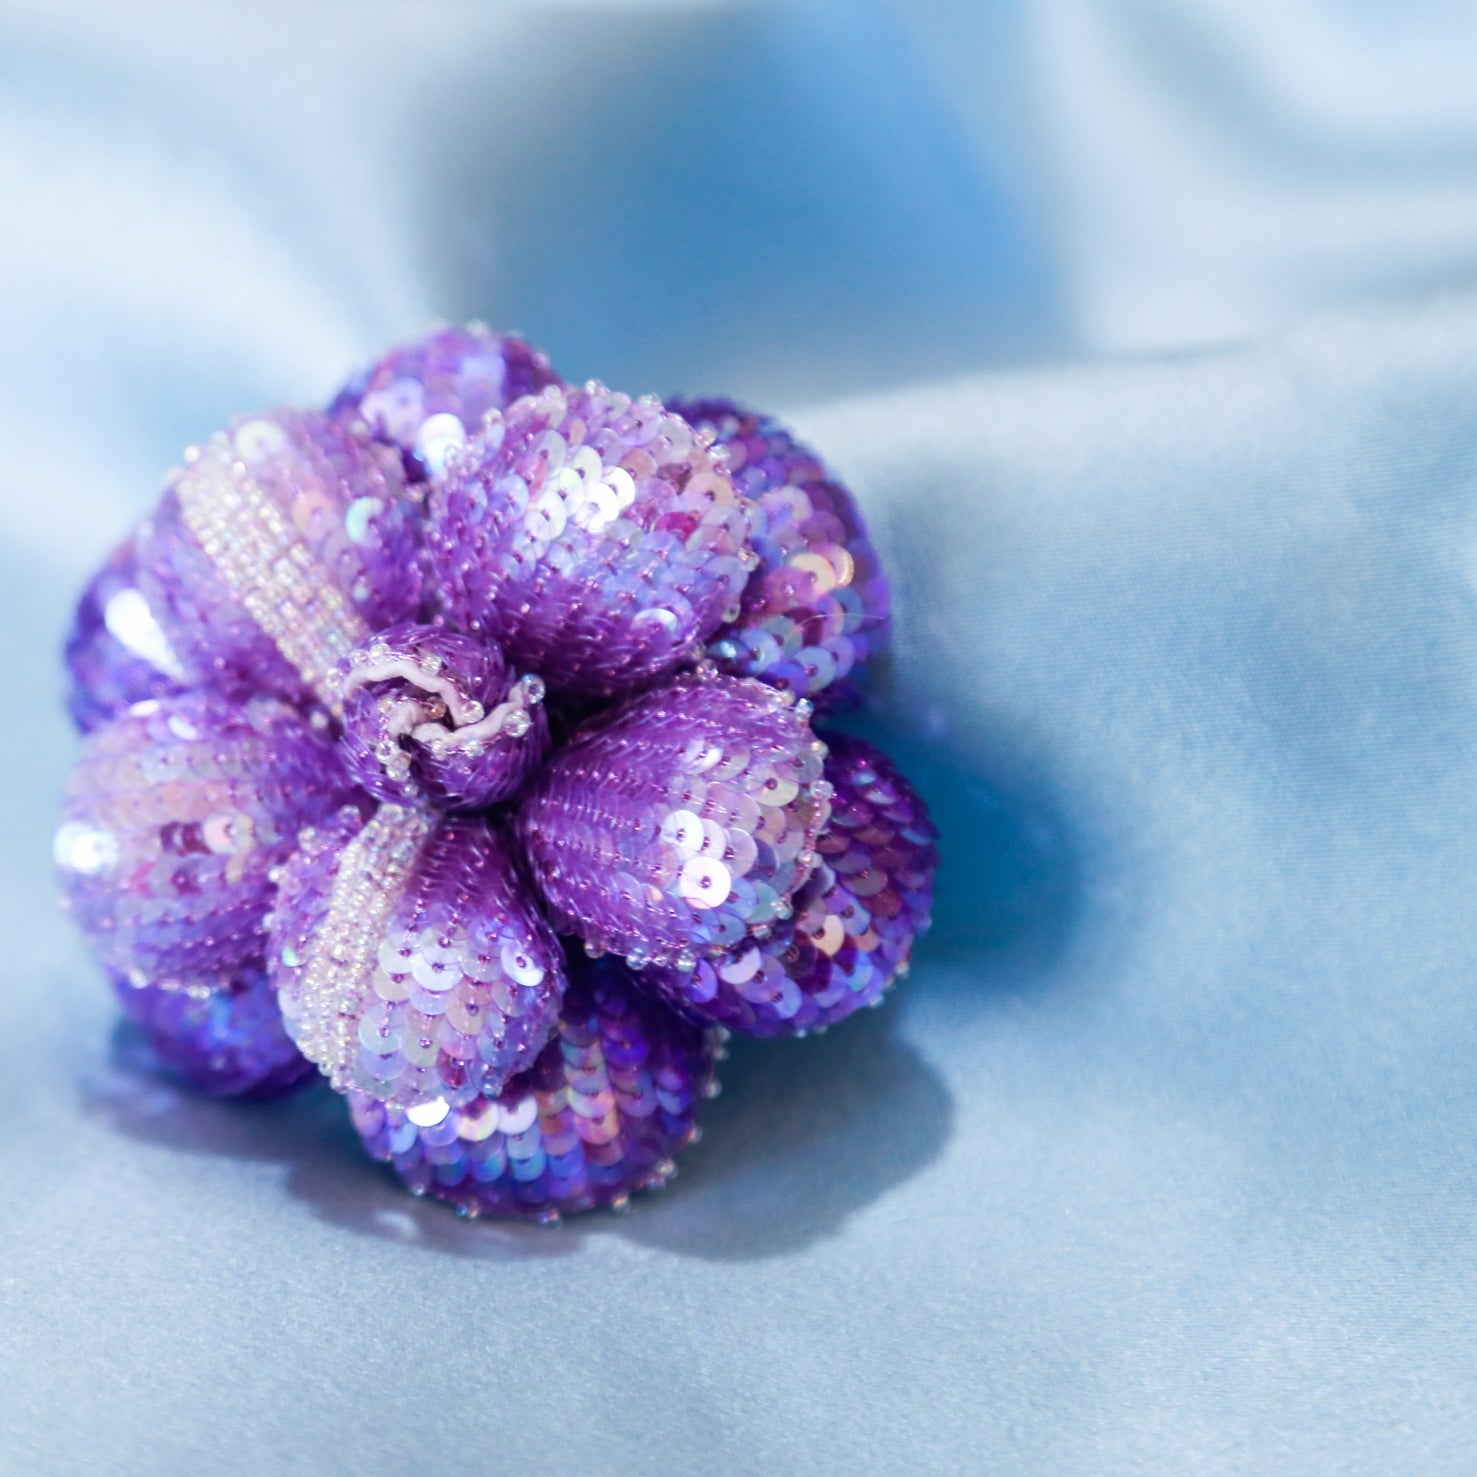 Tambour Embroidery Brooch Craft Kits-Purple Flower